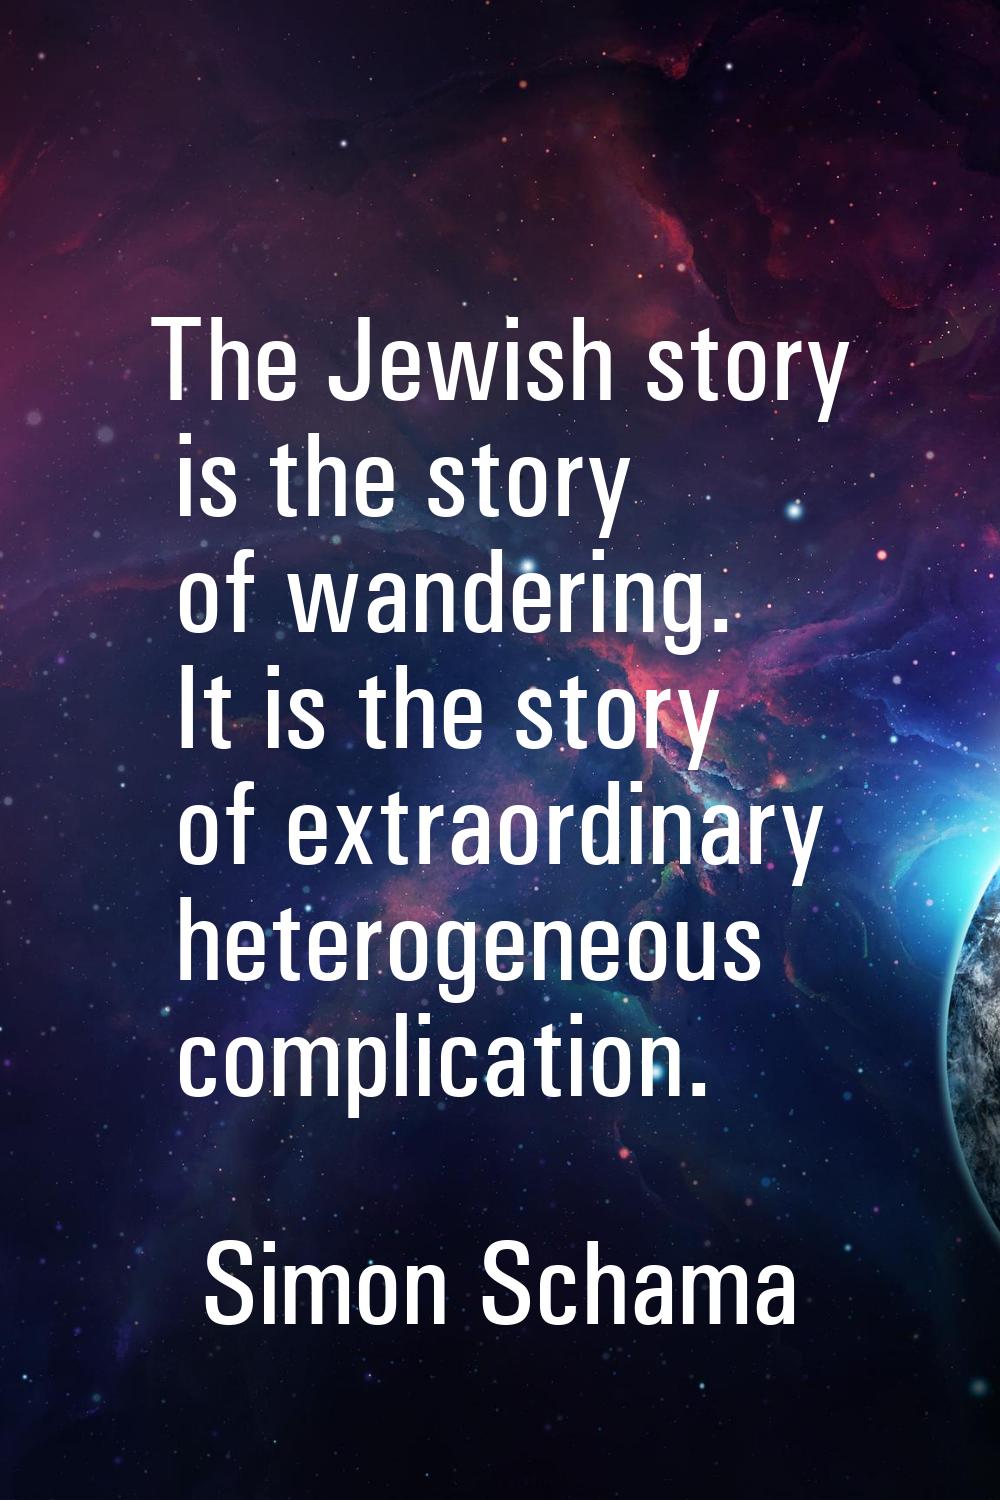 The Jewish story is the story of wandering. It is the story of extraordinary heterogeneous complica